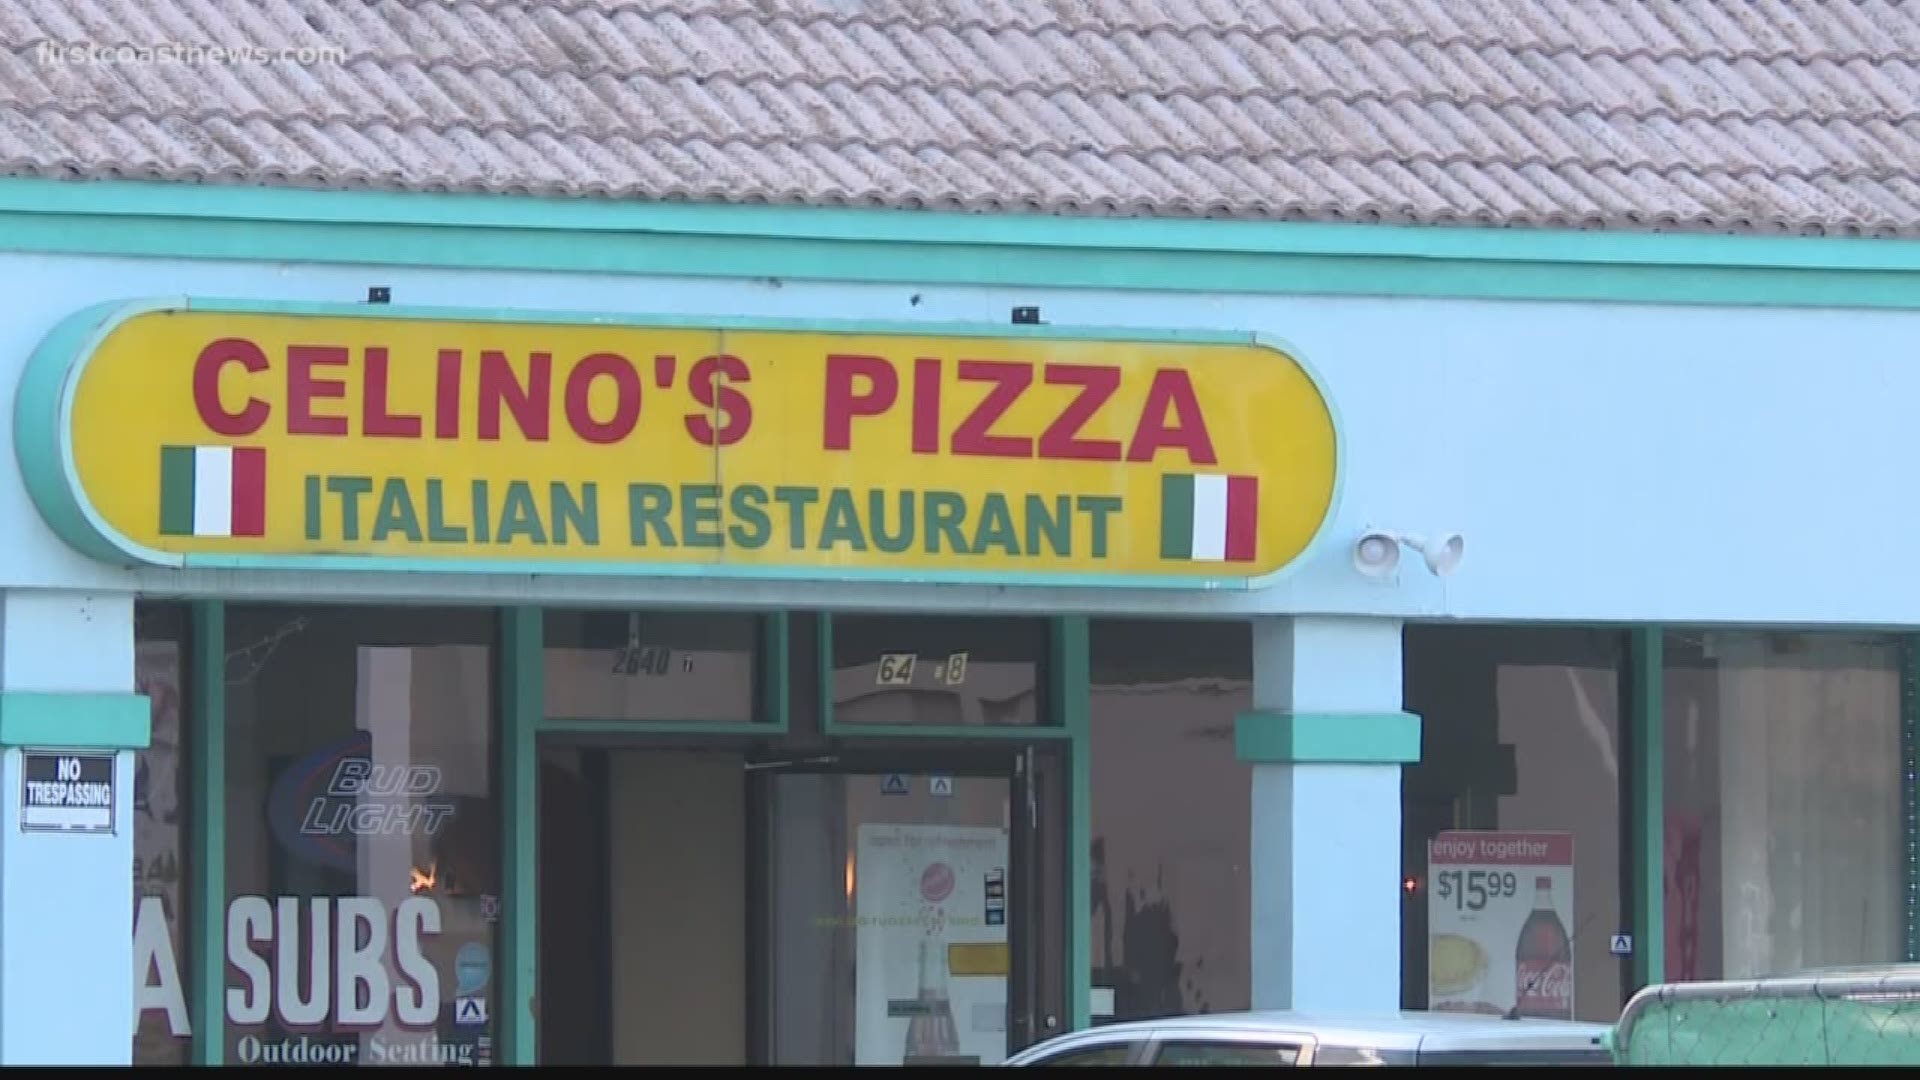 A former Arlington pizza parlor owner was arrested Sunday on fraud charges over a year of being accused of repeatedly overcharging customers.